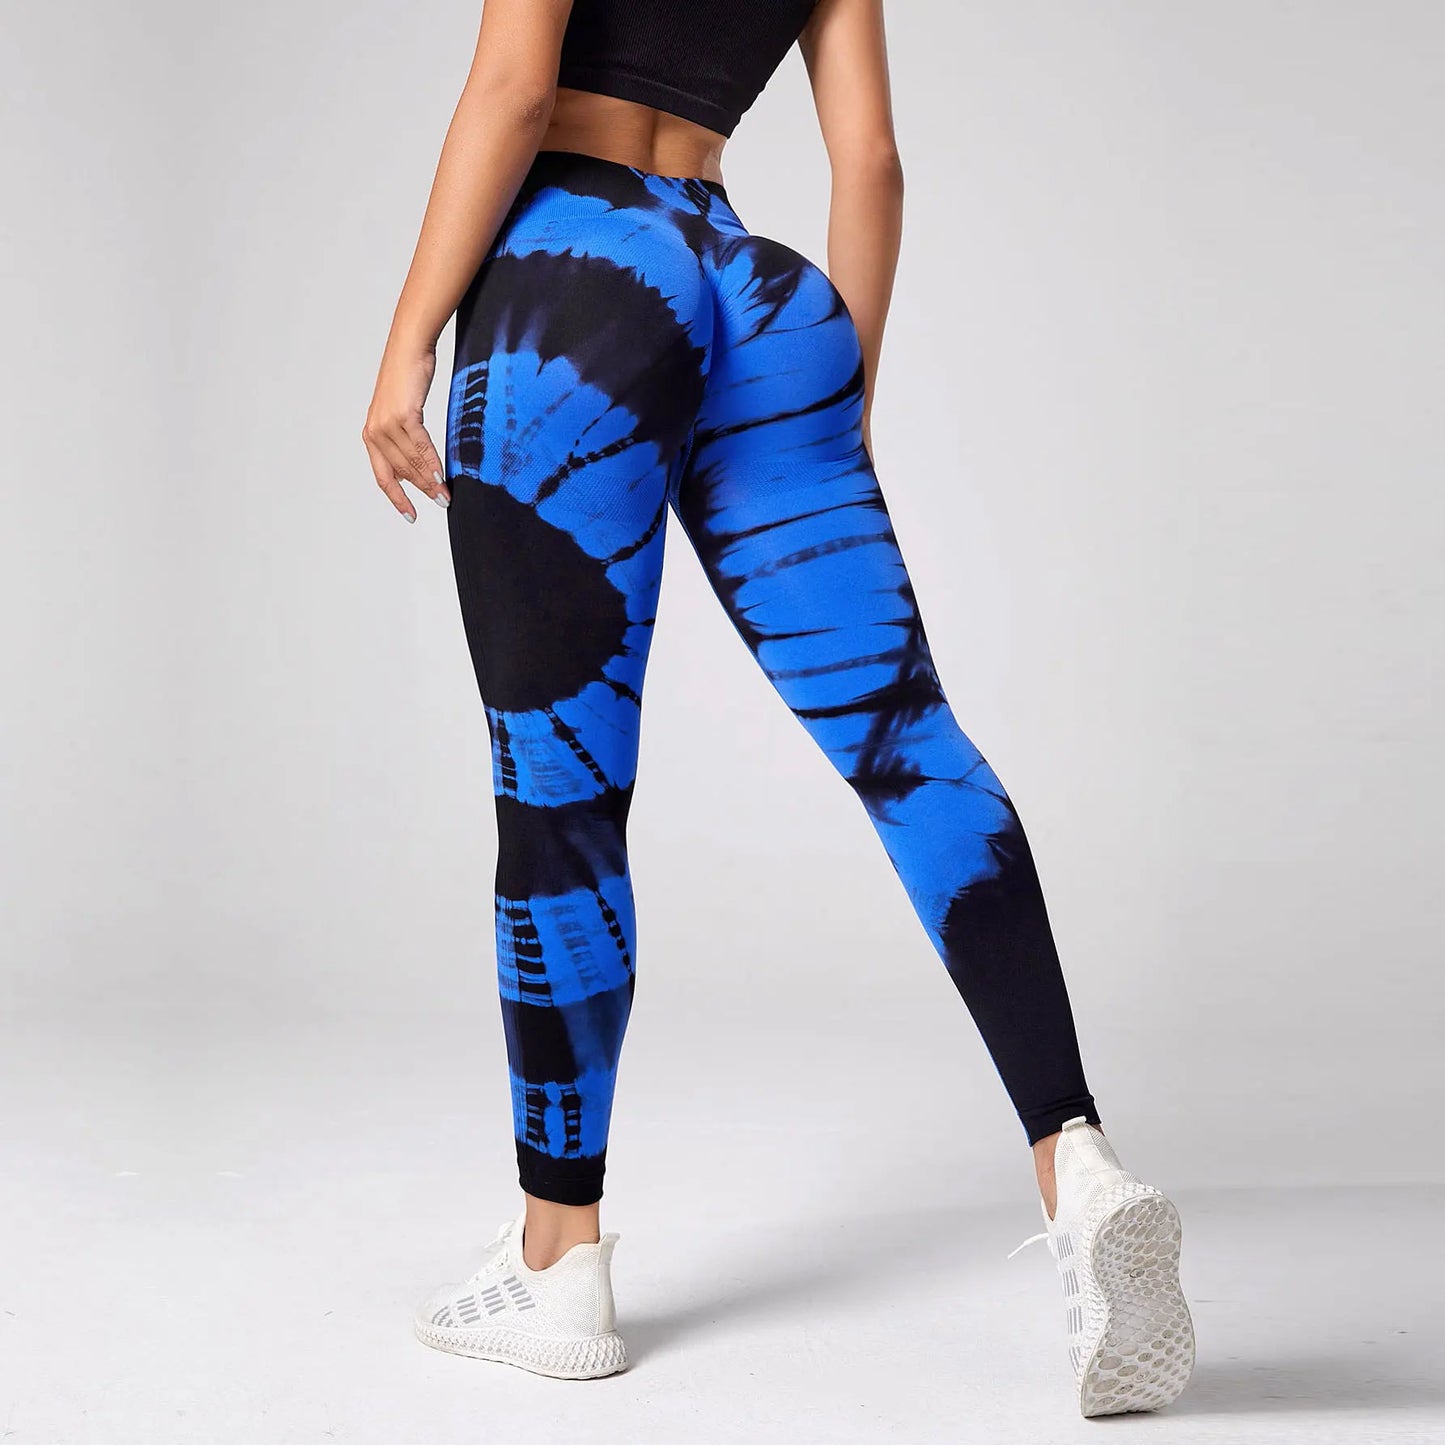 New Tie-Dye high waisted, Booty lifting Seamless Sports Leggings for Women